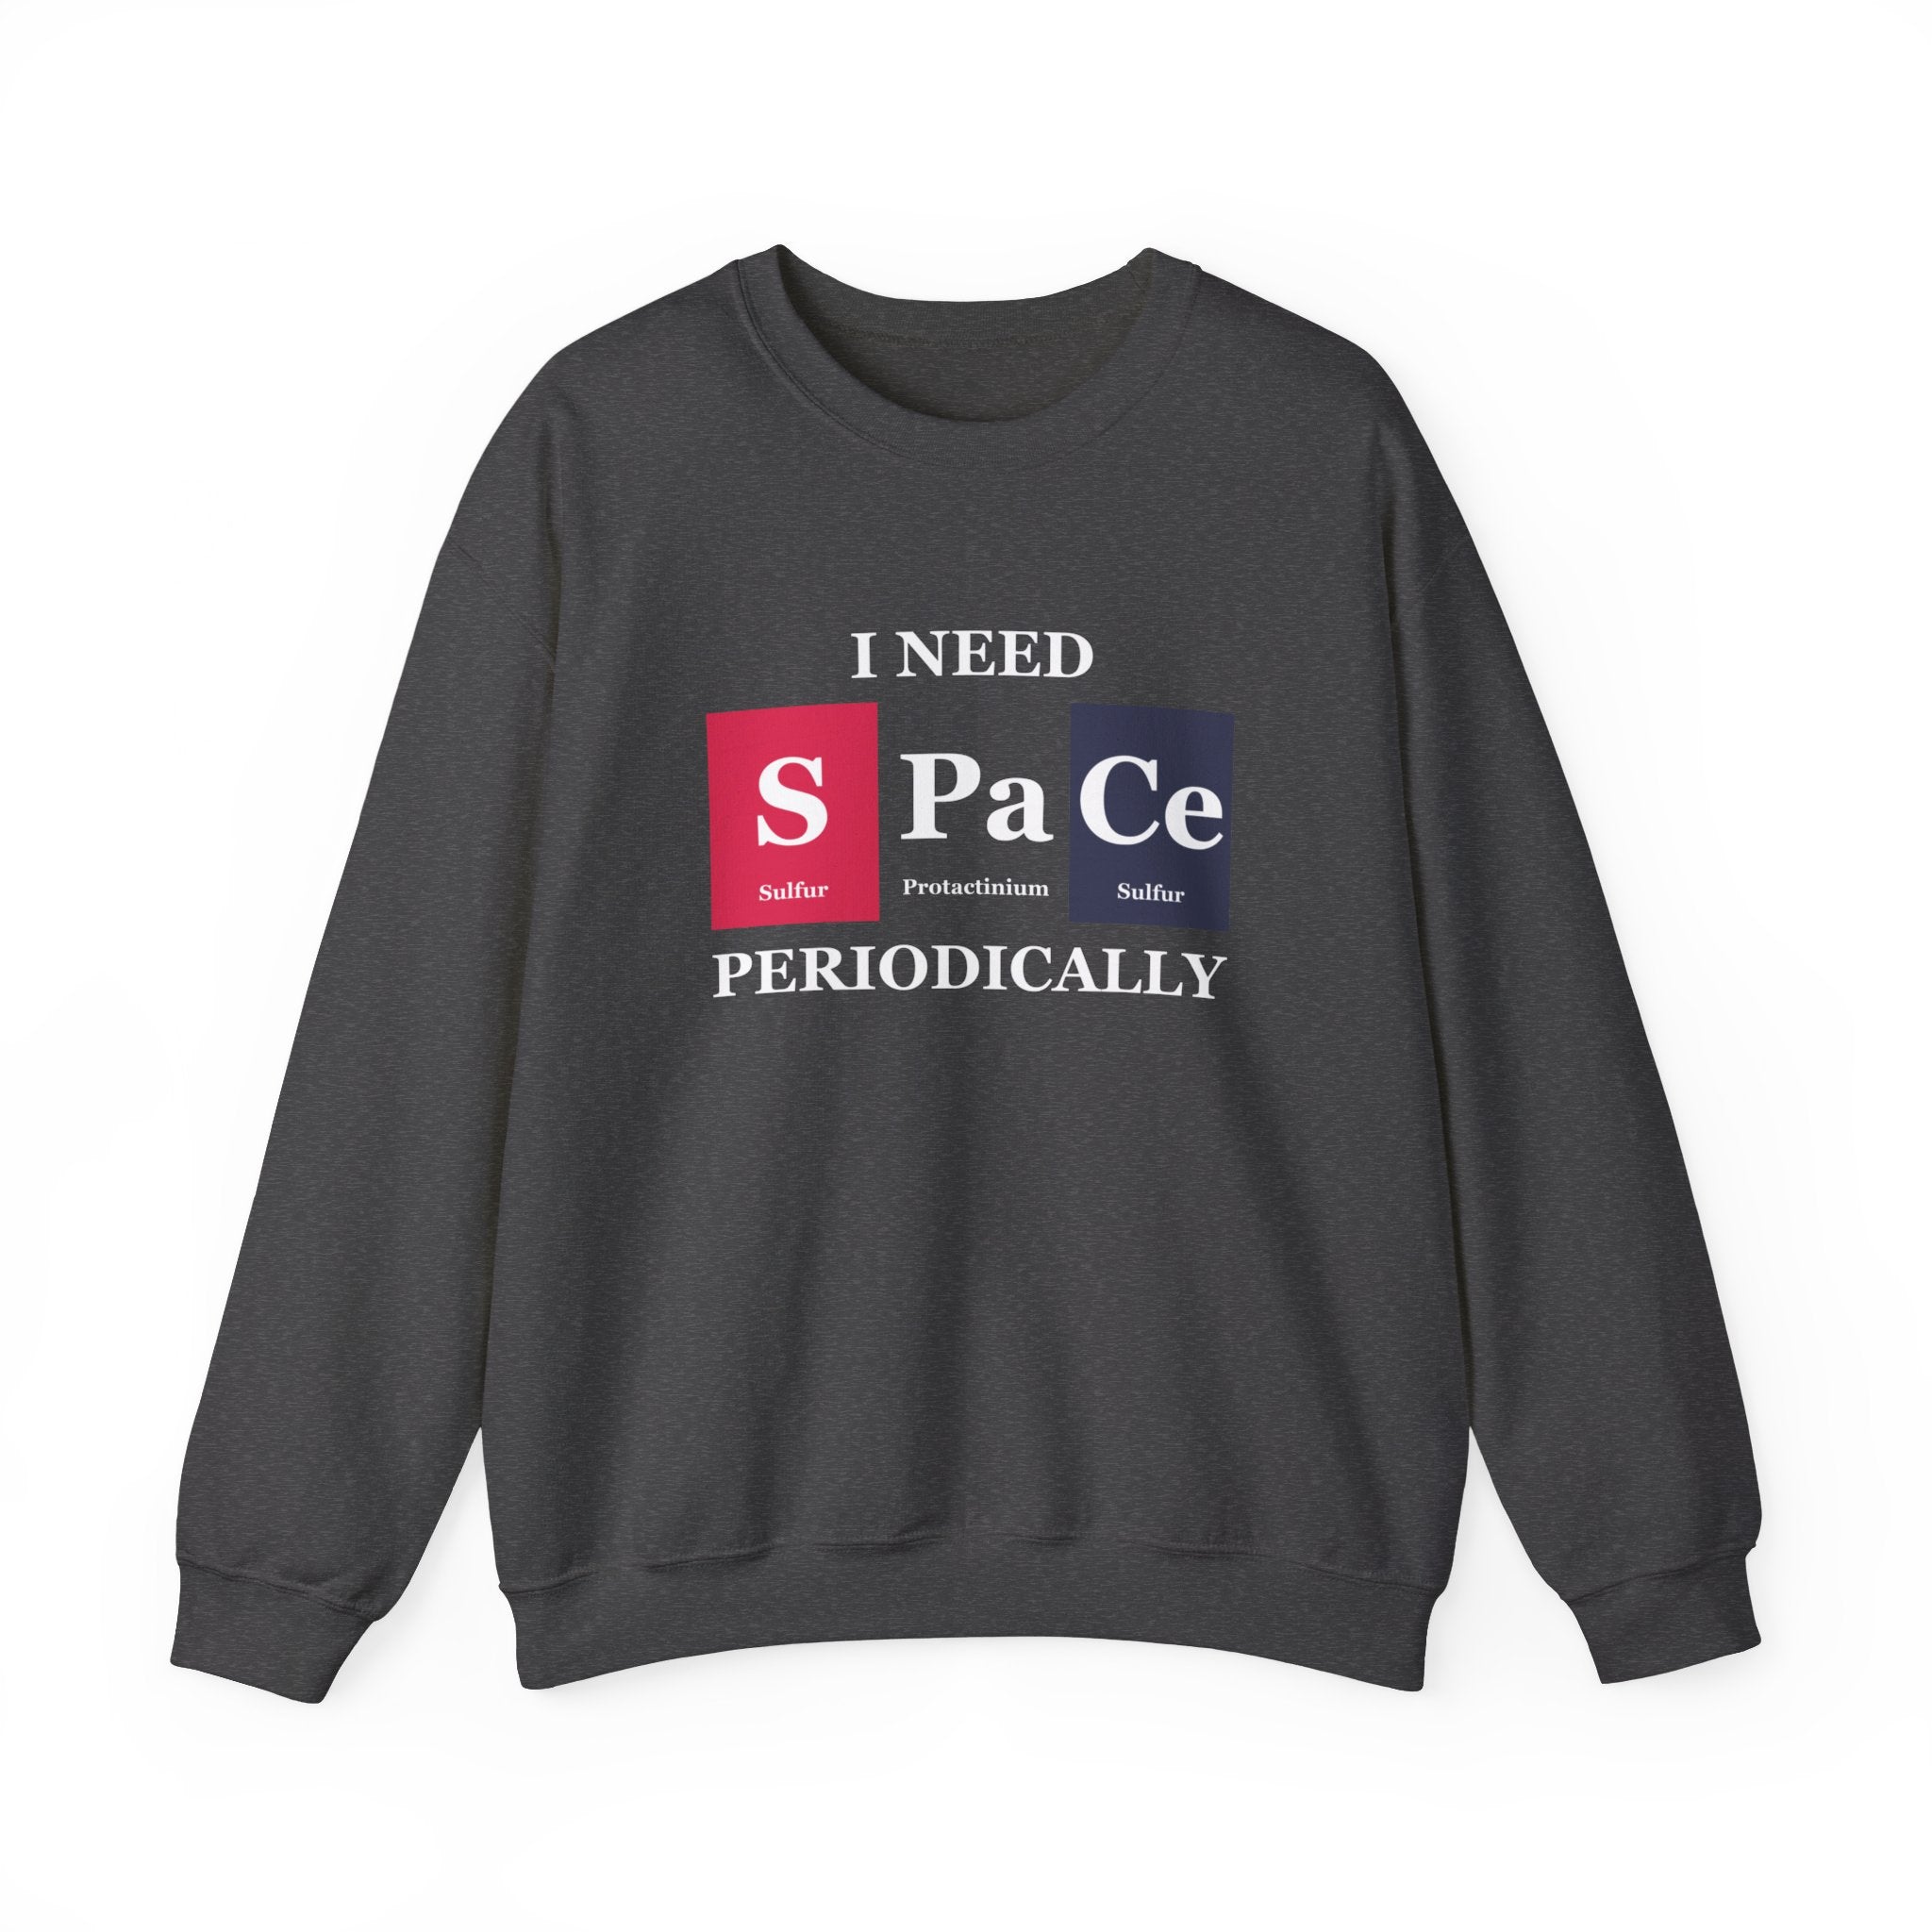 A dark gray S-Pa-Ce - Sweatshirt with the text "I need space periodically" in a snug design incorporating elements from the periodic table: Sulfur (S), Protactinium (Pa), and Cerium (Ce). Perfect for winter coziness.